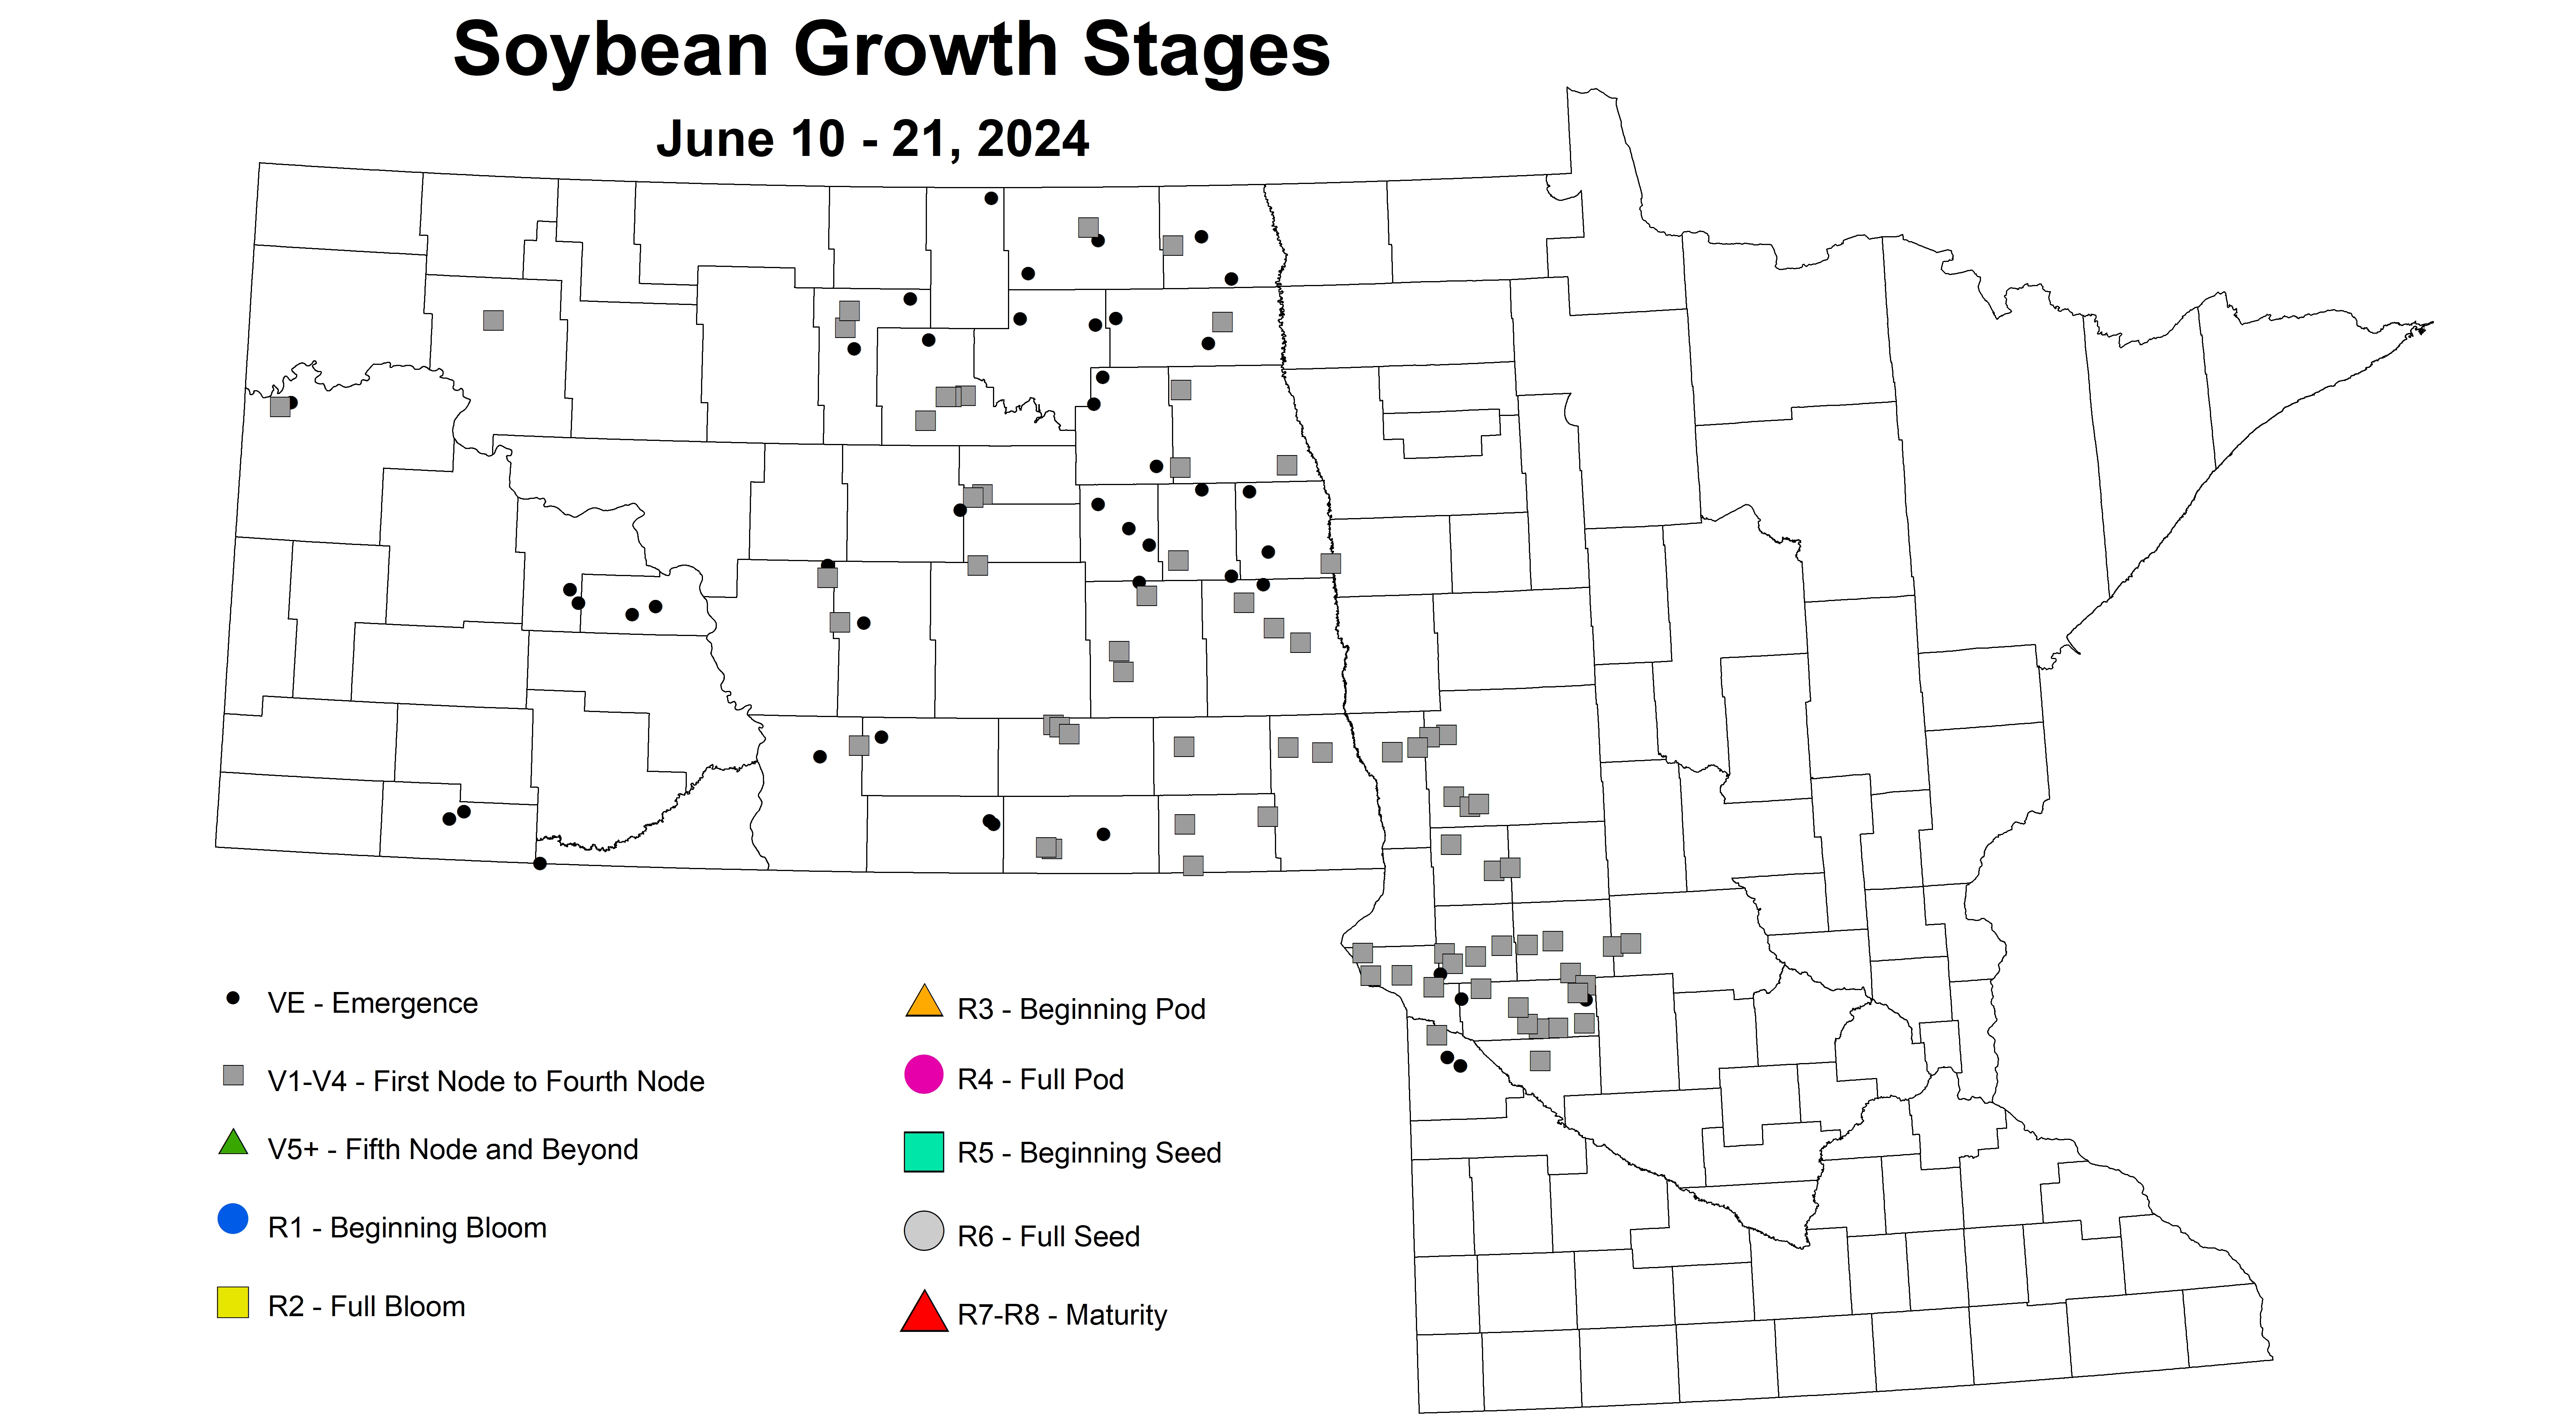 soybean growth stages June 10-21 2024